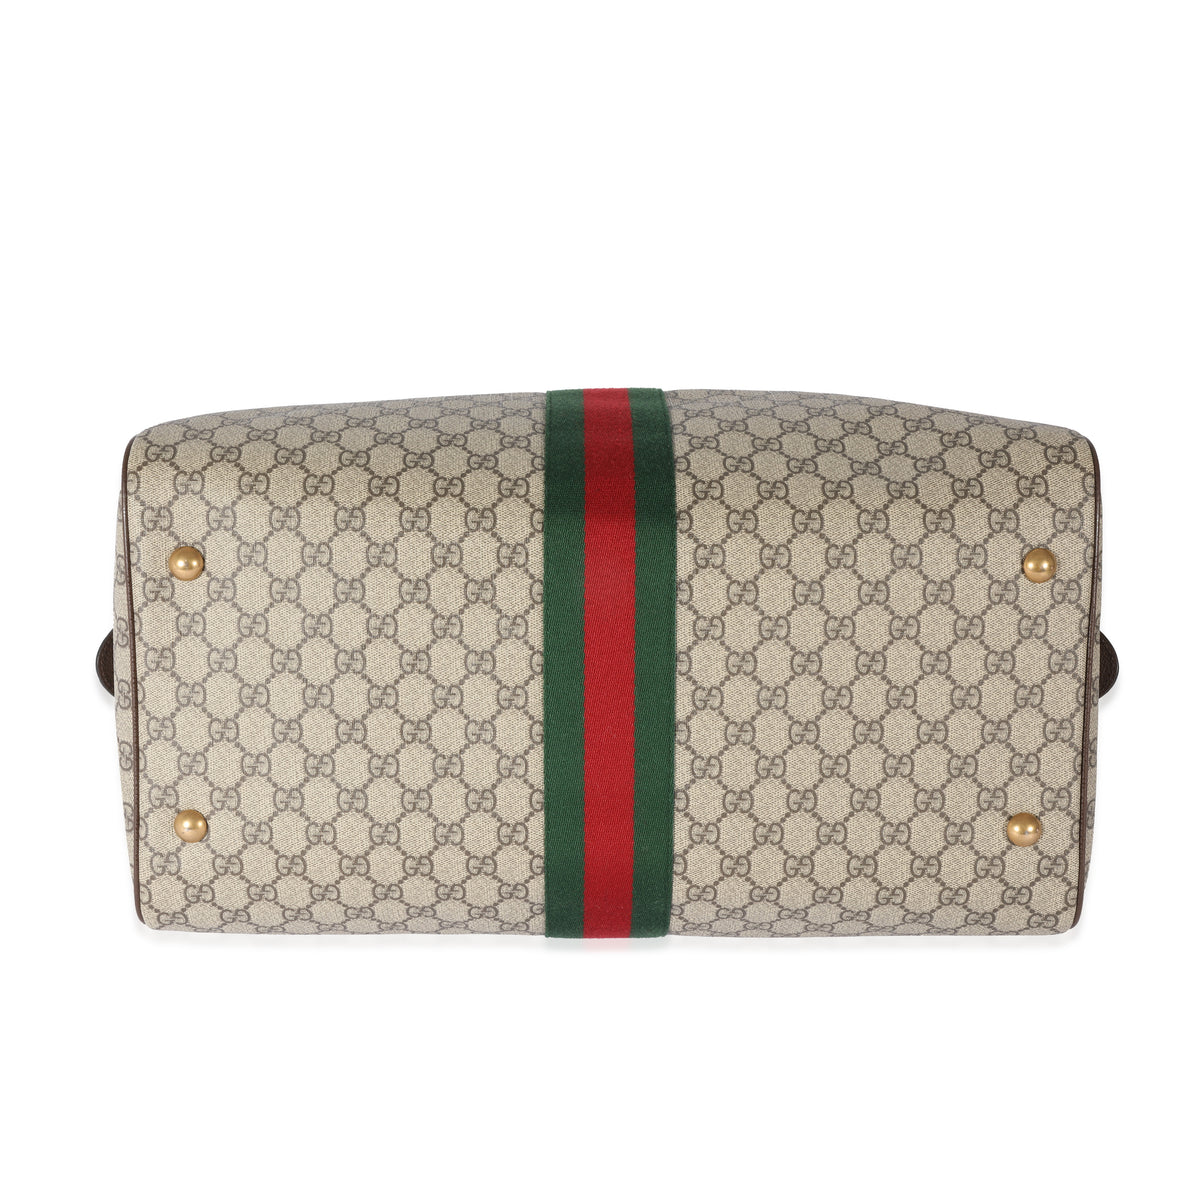 Gucci Light Tobacco Vintage Boston Bag Leather Satchel, Best Price and  Reviews